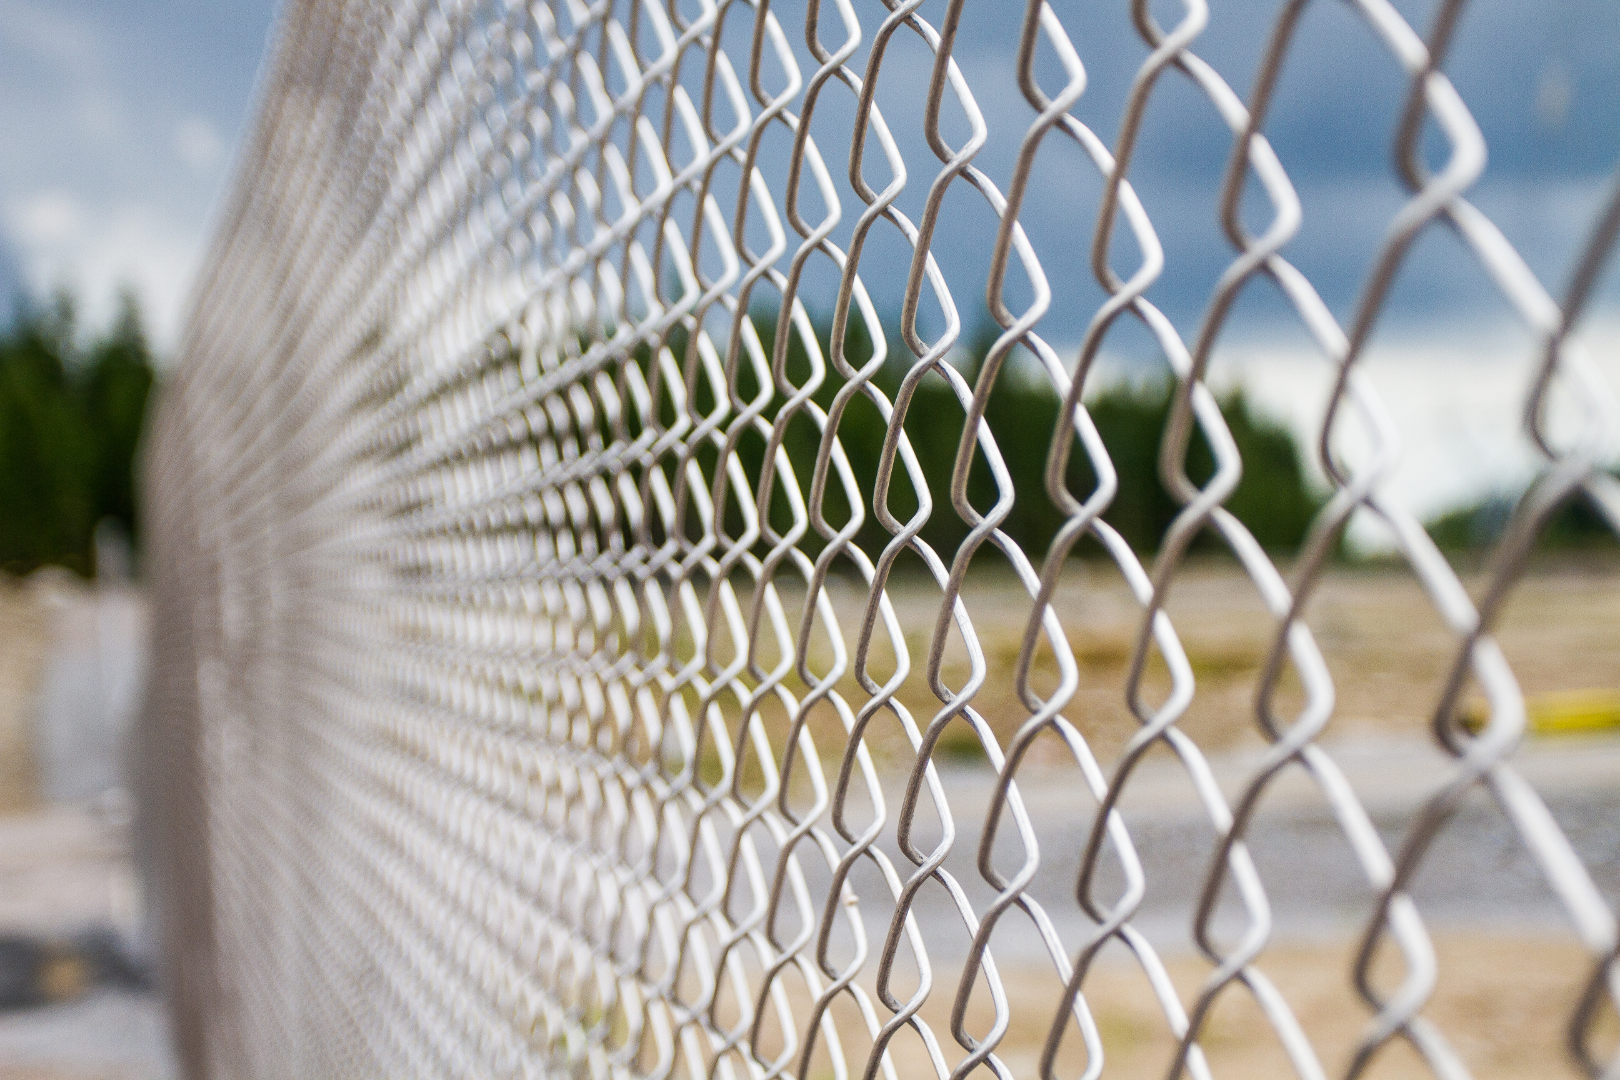 An image of chain link fence in Morrisville, NC